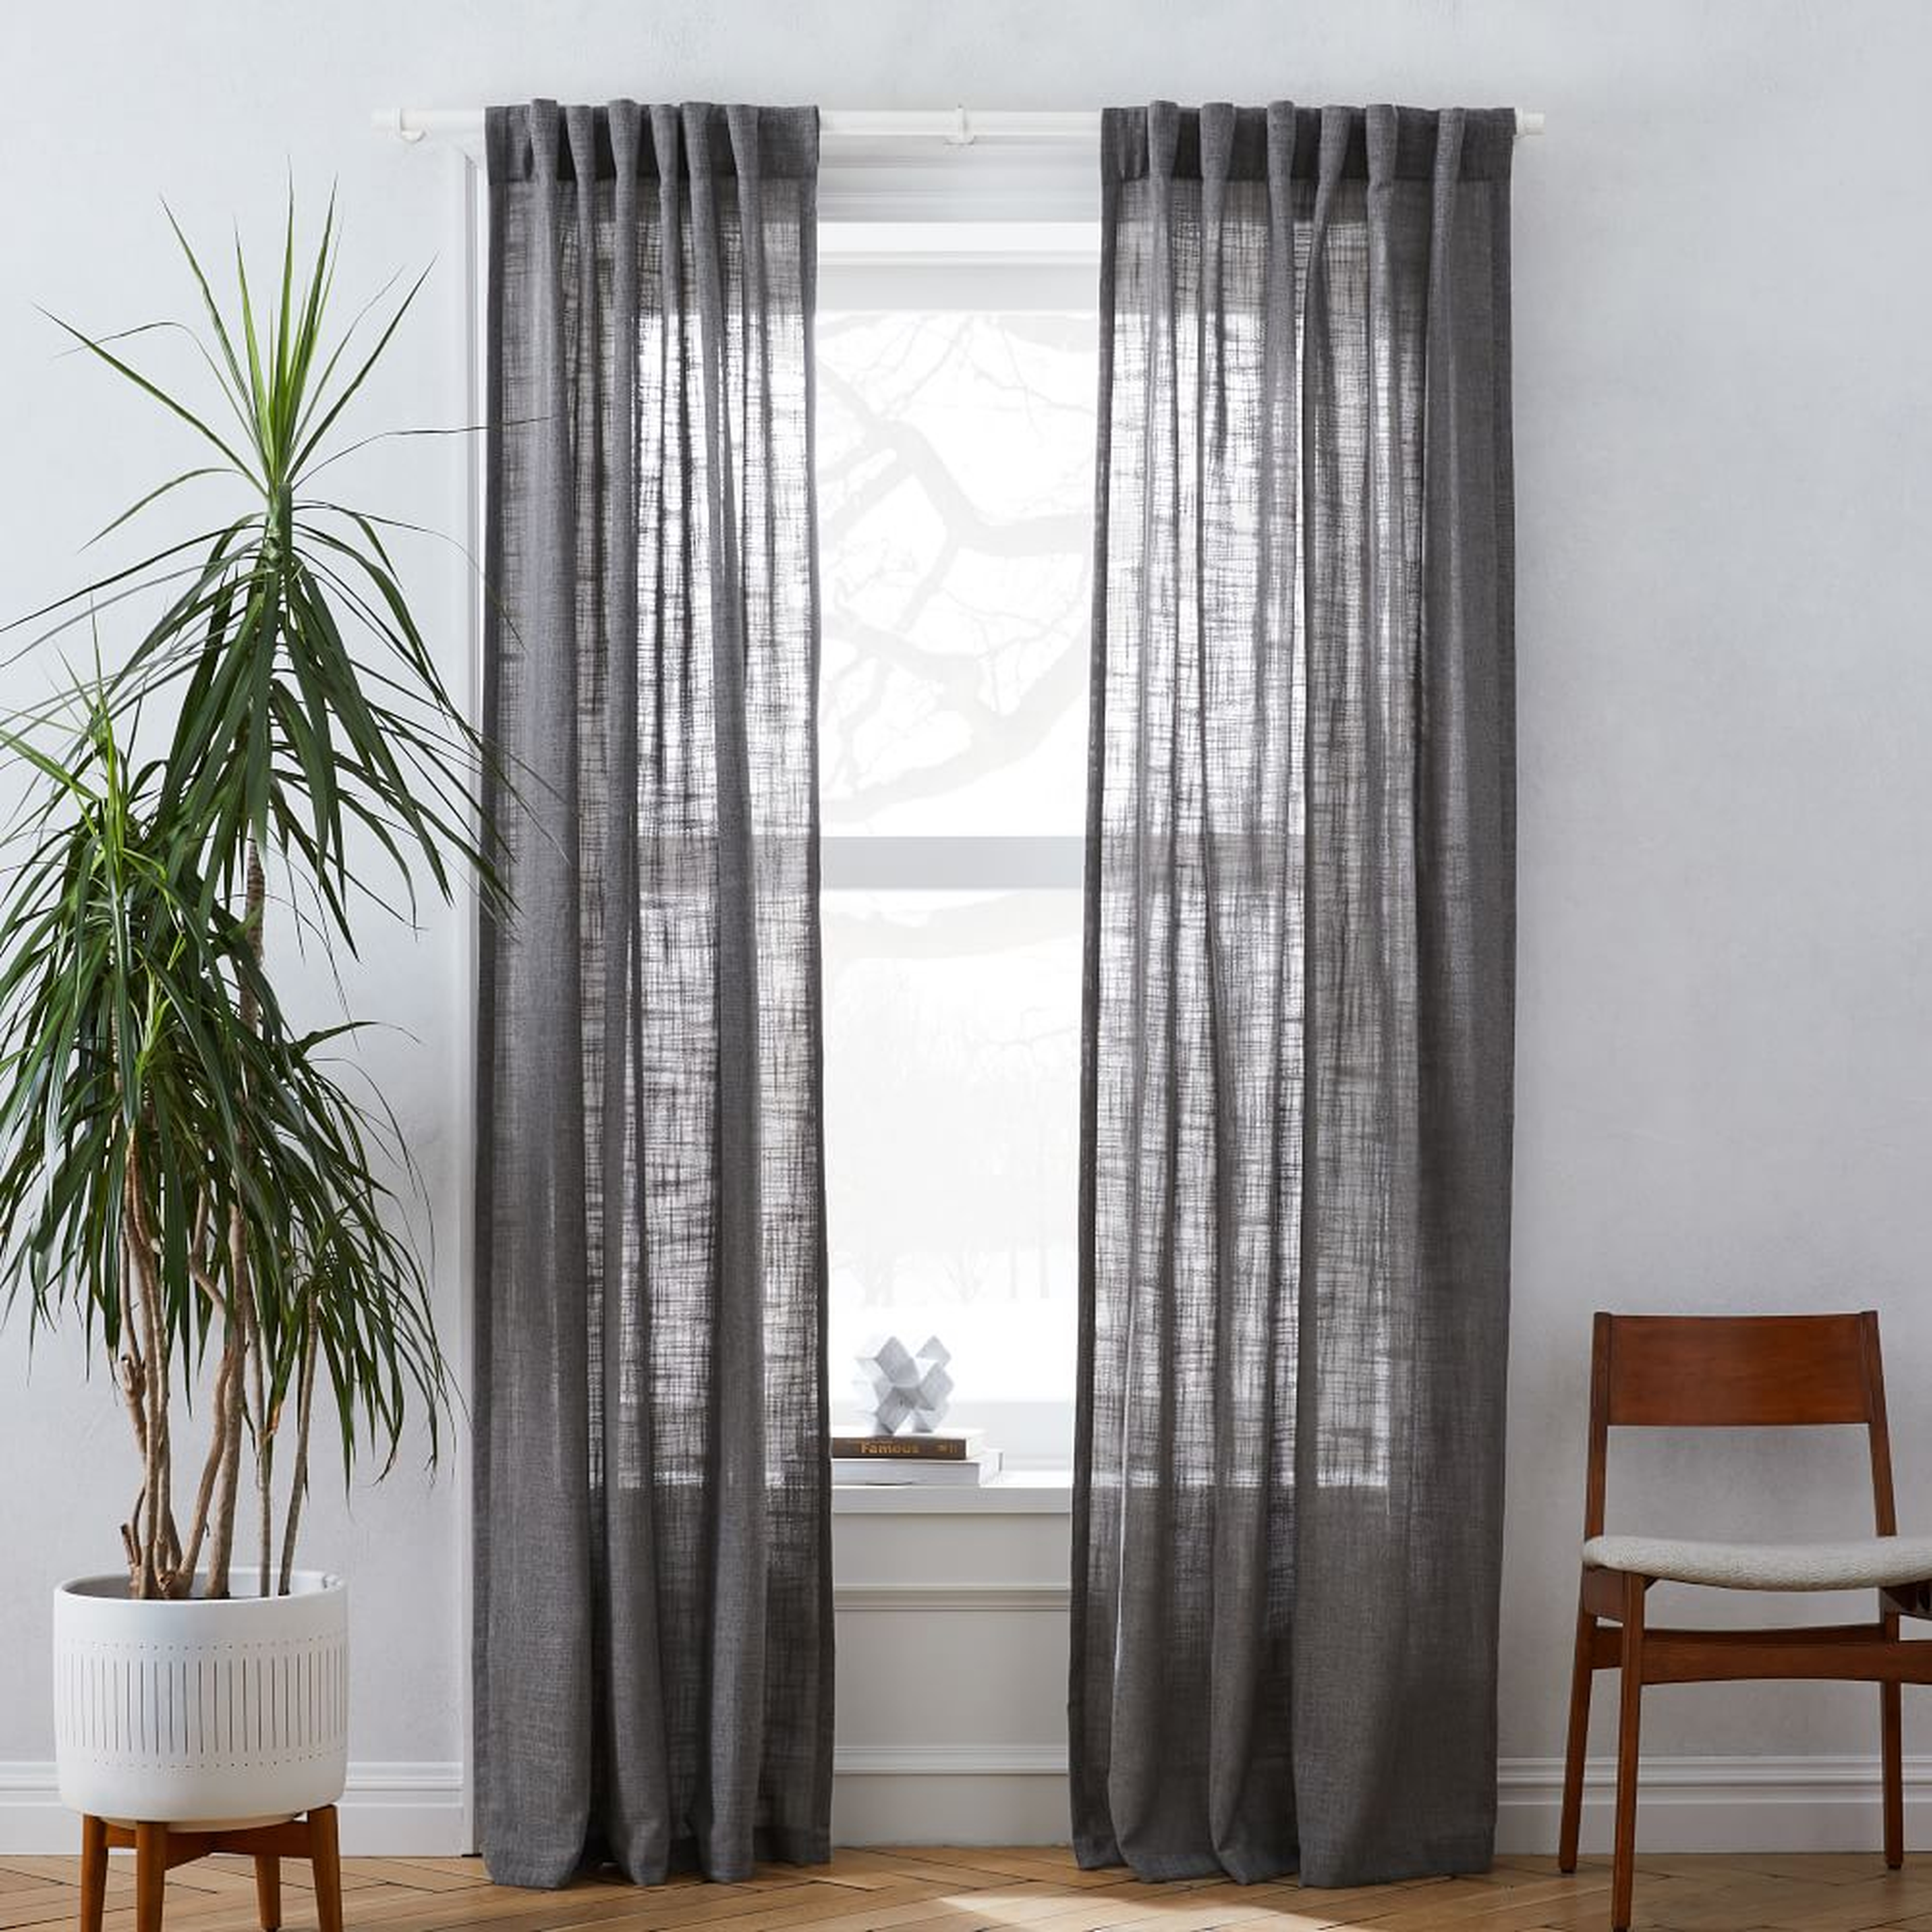 Crossweave Curtain with Blackout Lining, Charcoal, 48"x108", Set of 2 - West Elm